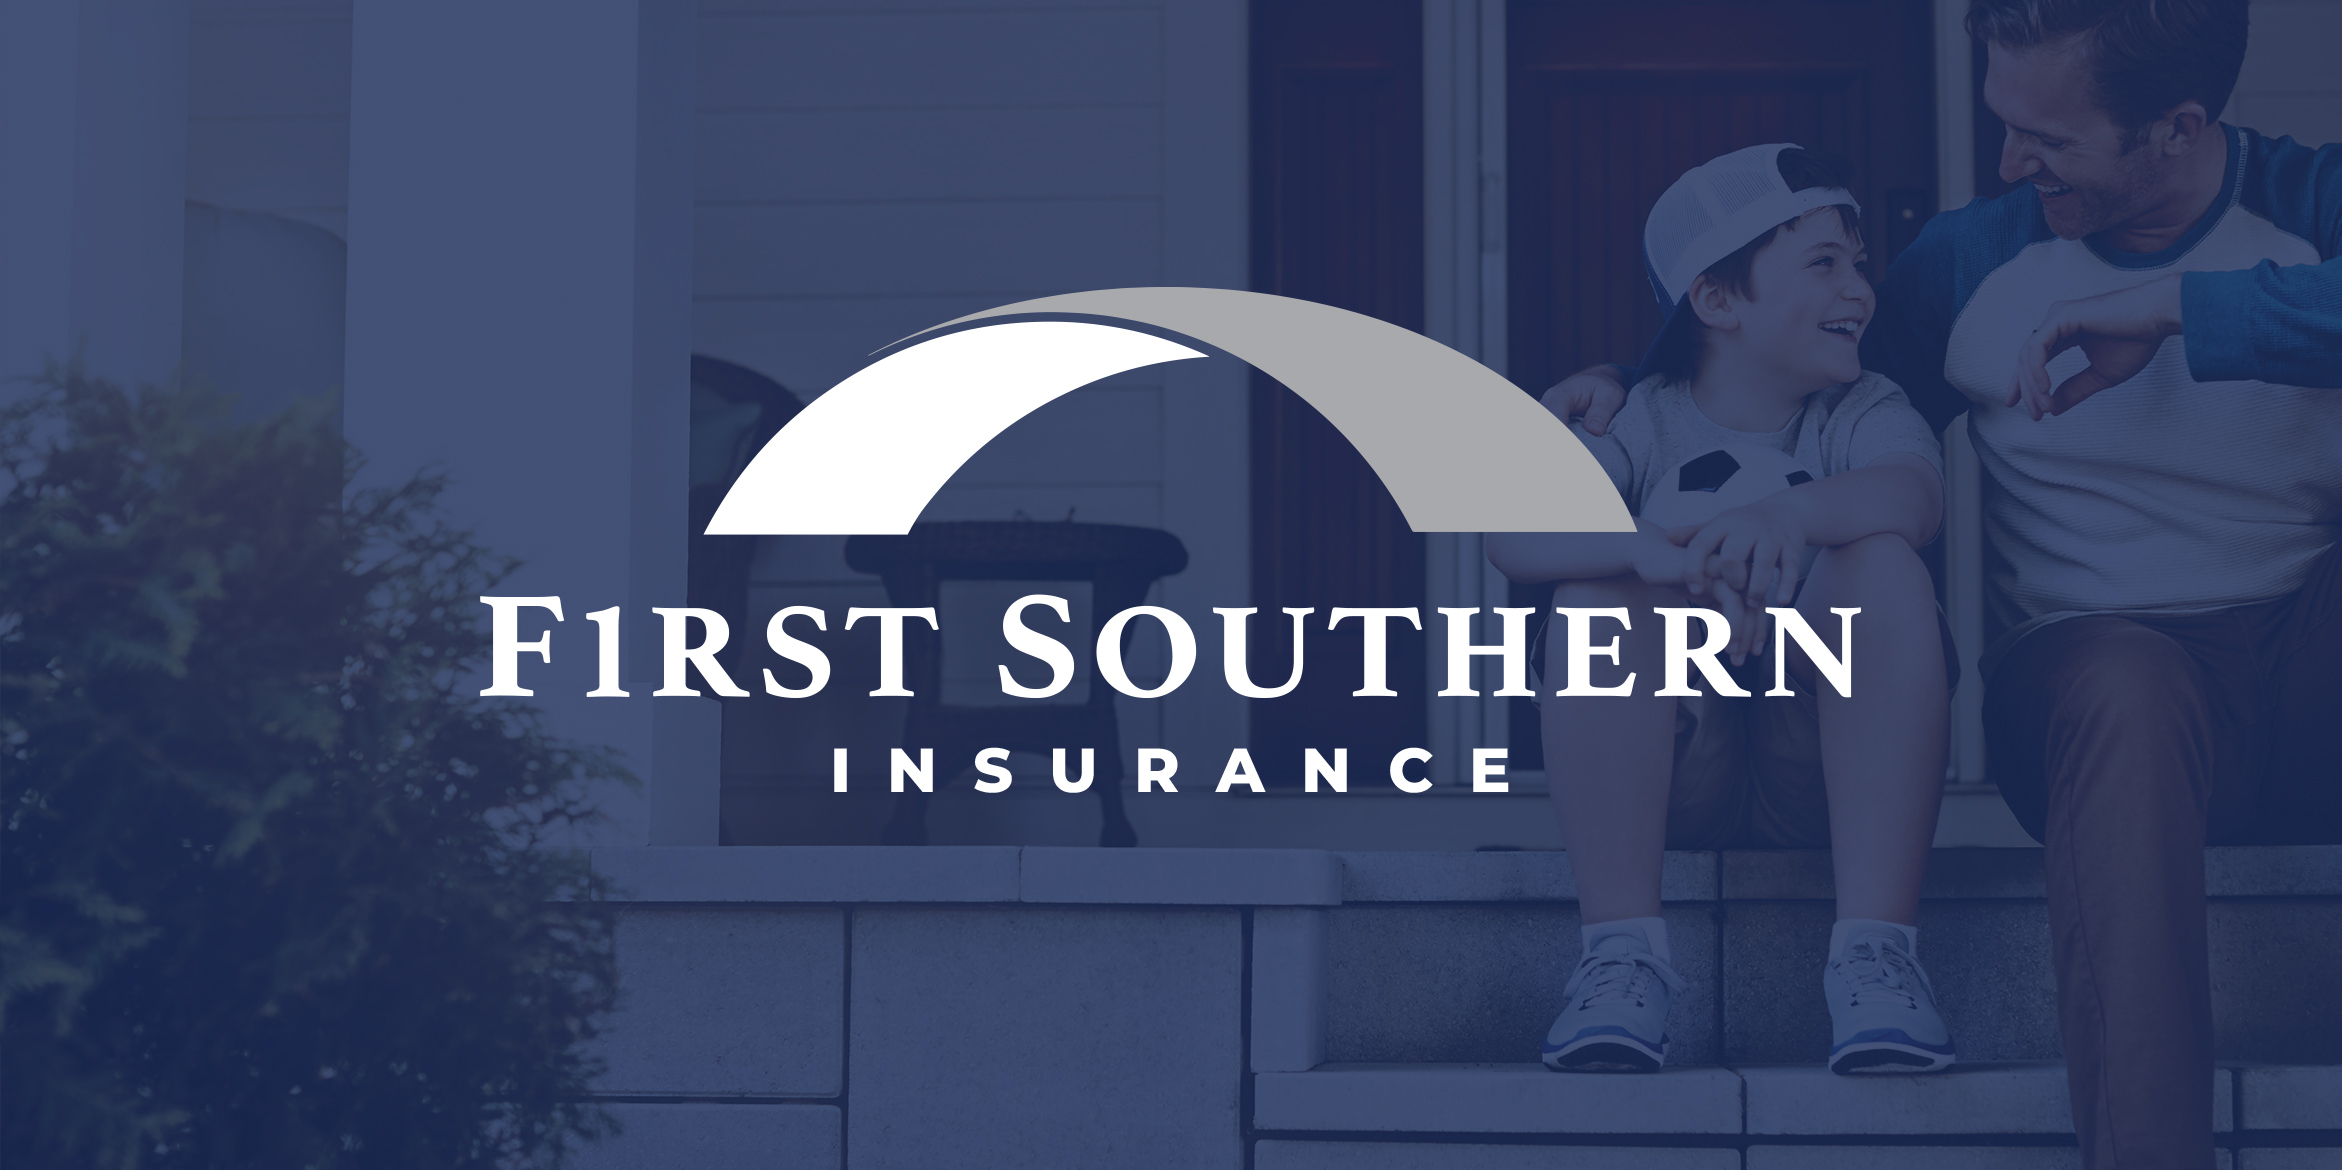 First southern national bank jobs